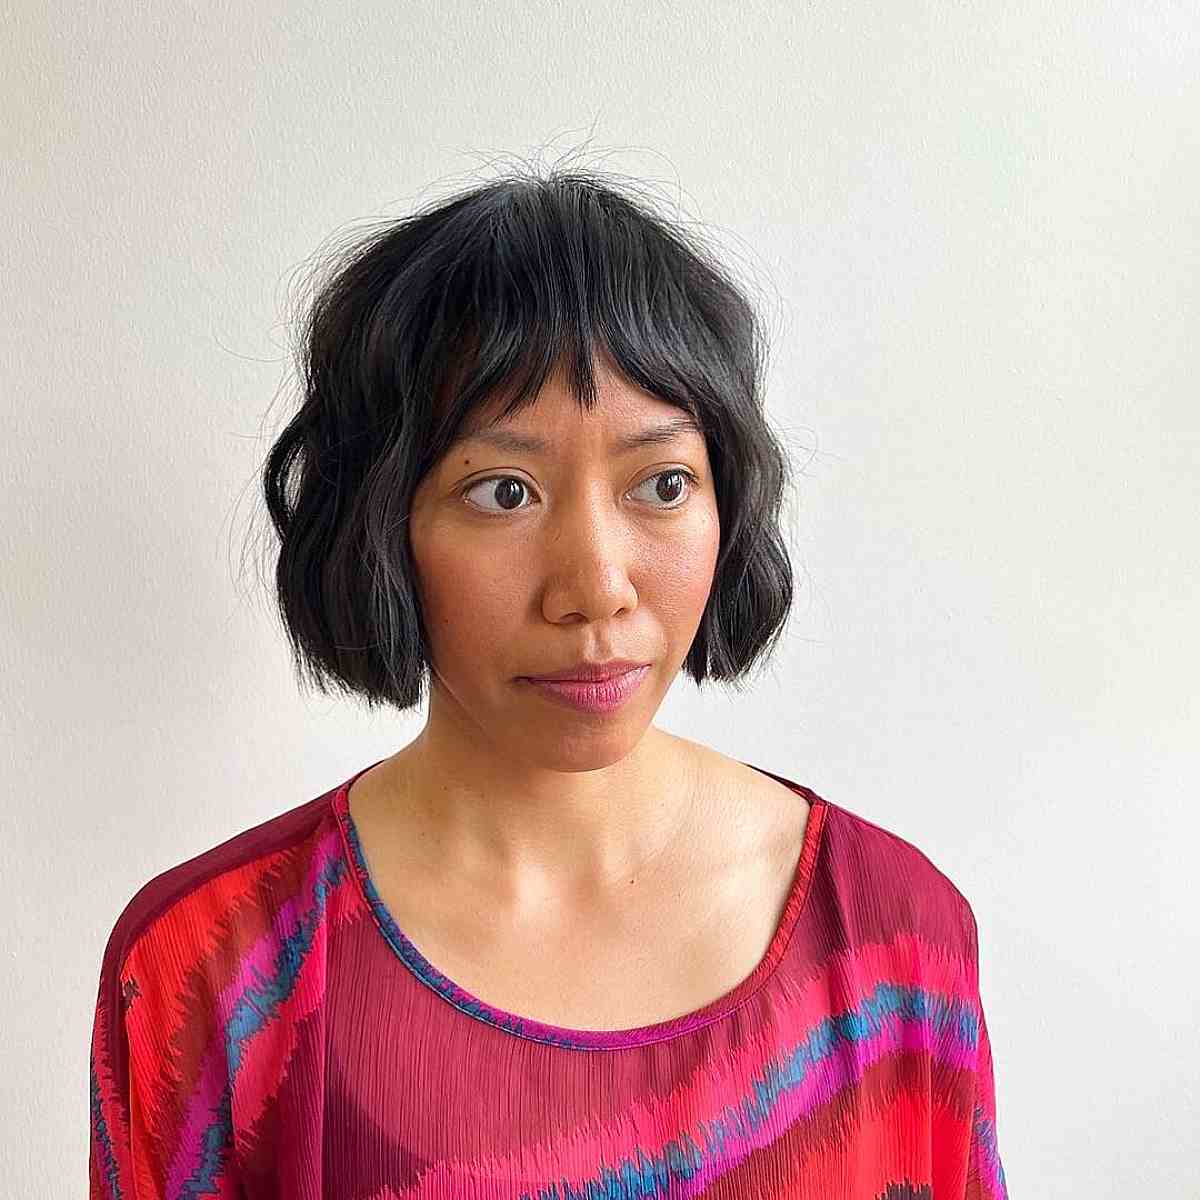 Textured Wavy Chin-Length Bob Cut with a Fringe